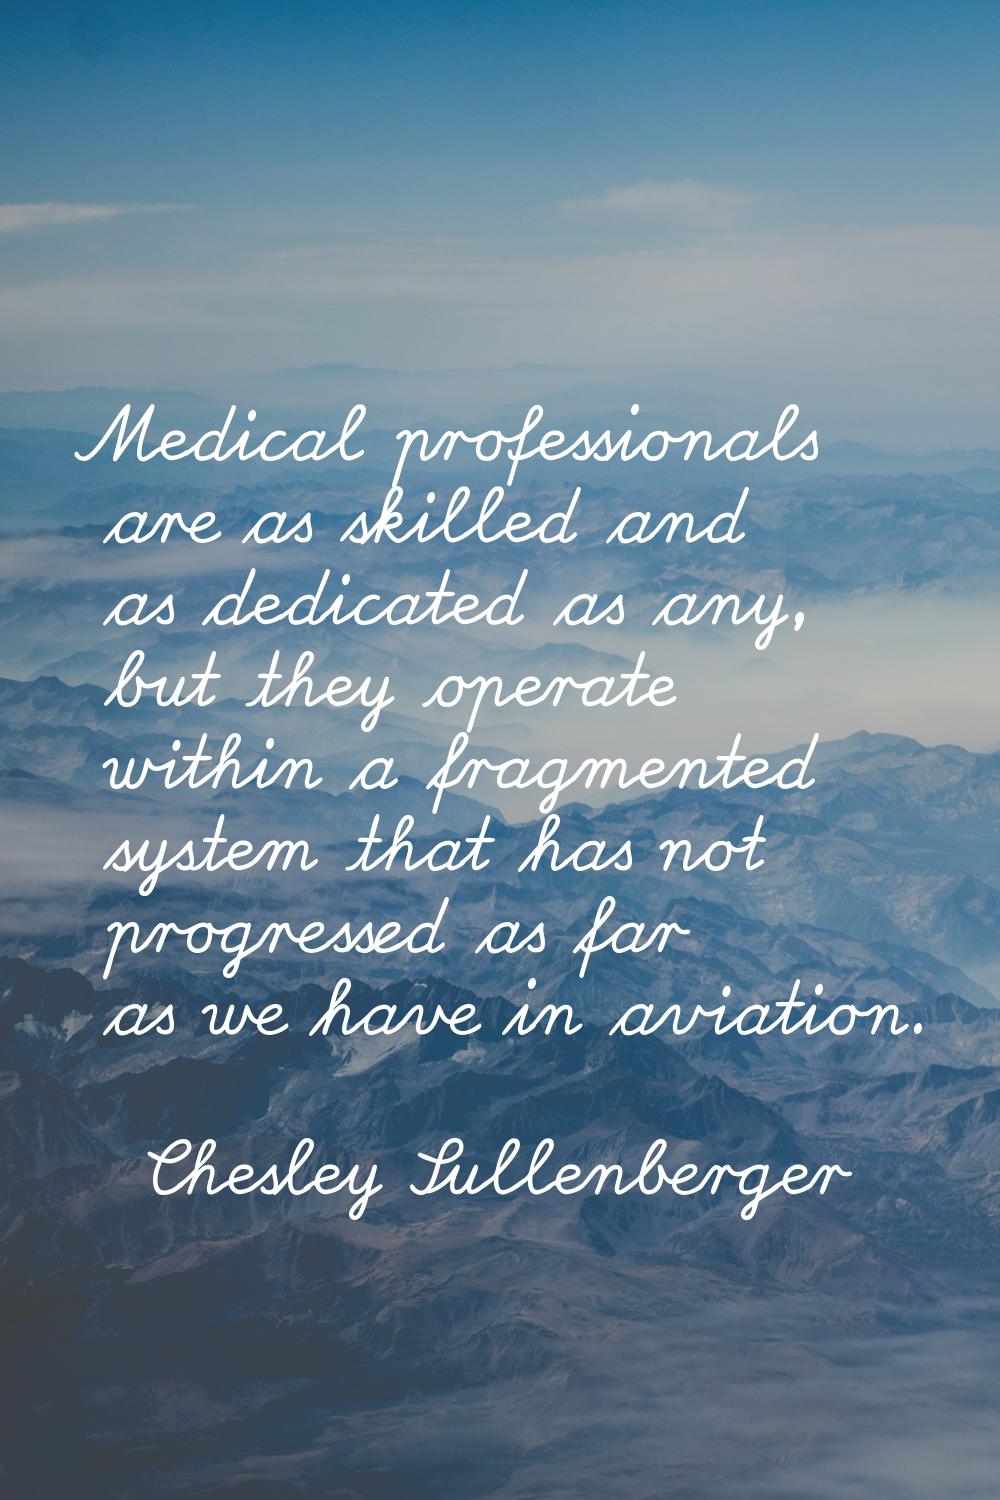 Medical professionals are as skilled and as dedicated as any, but they operate within a fragmented 